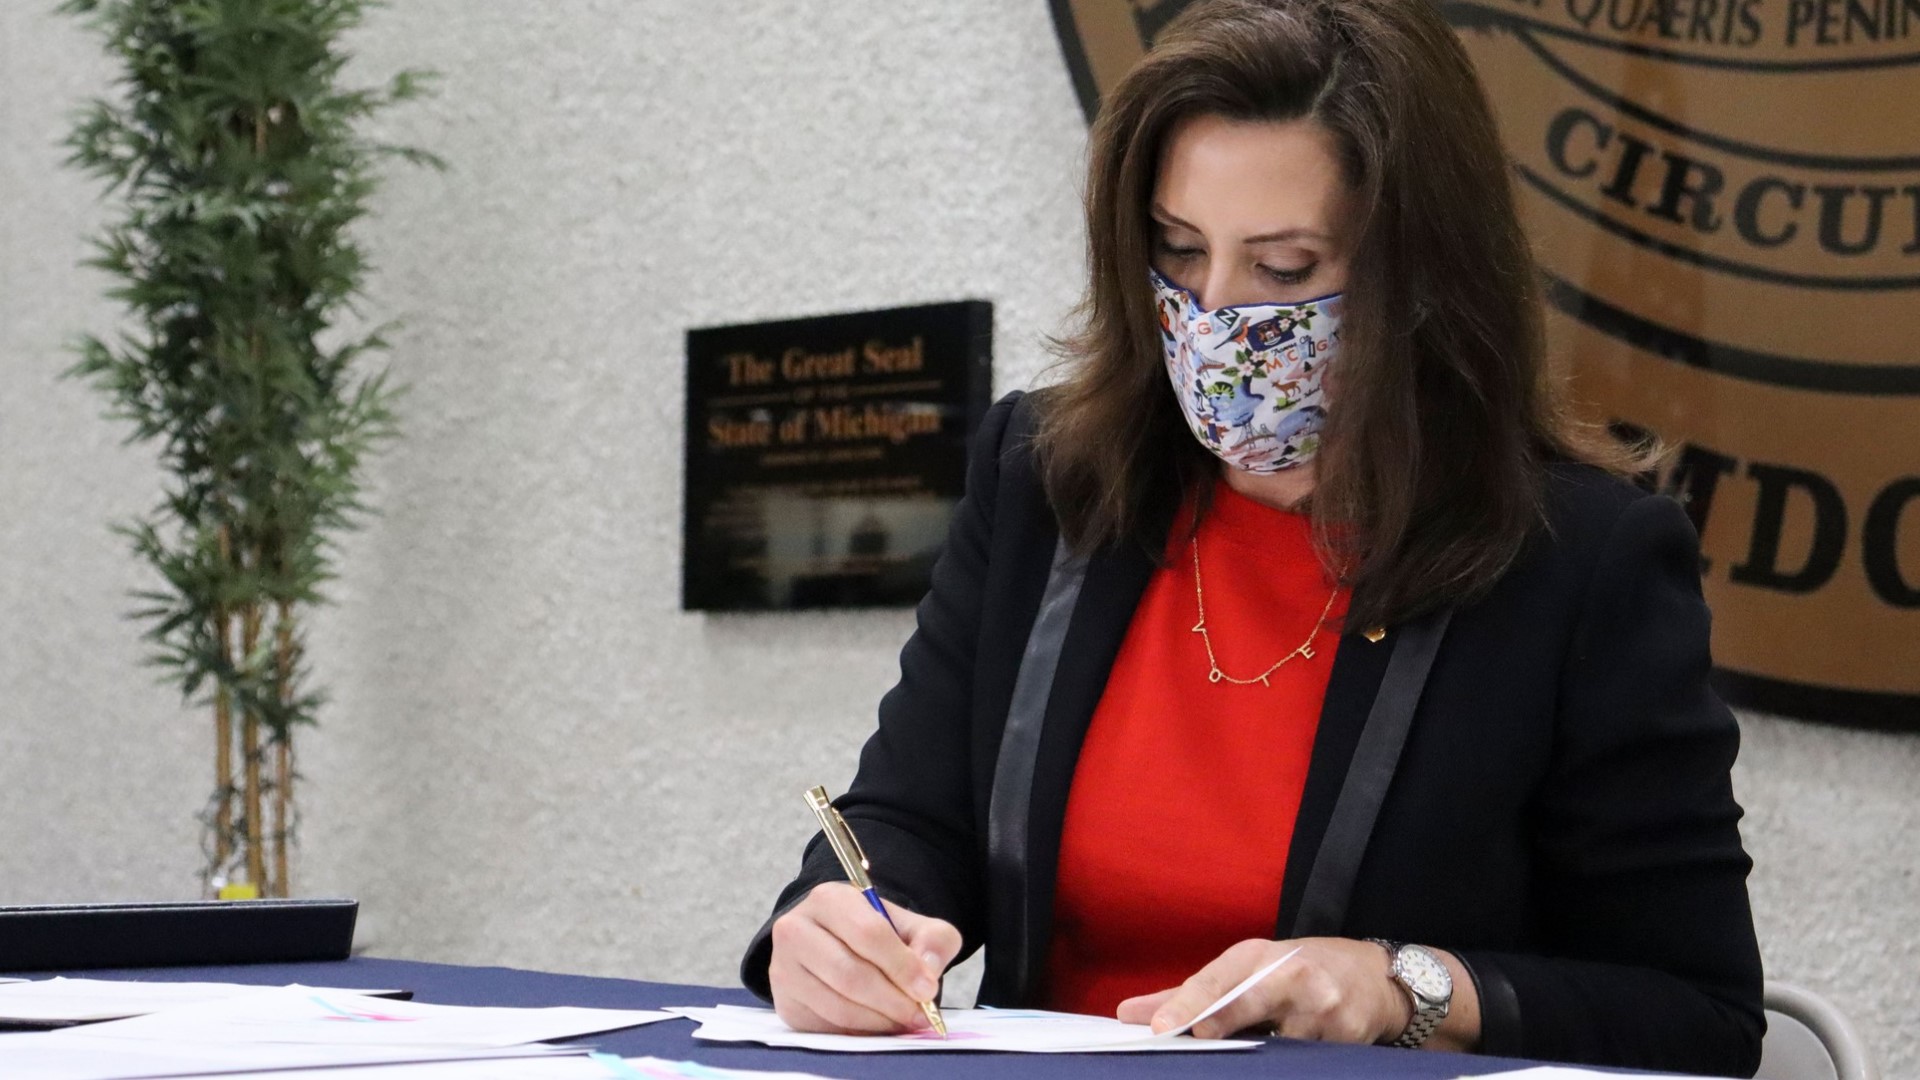 Gov. Gretchen Whitmer has signed at least $2 billion in COVID-19 relief spending while vetoing $650 million.